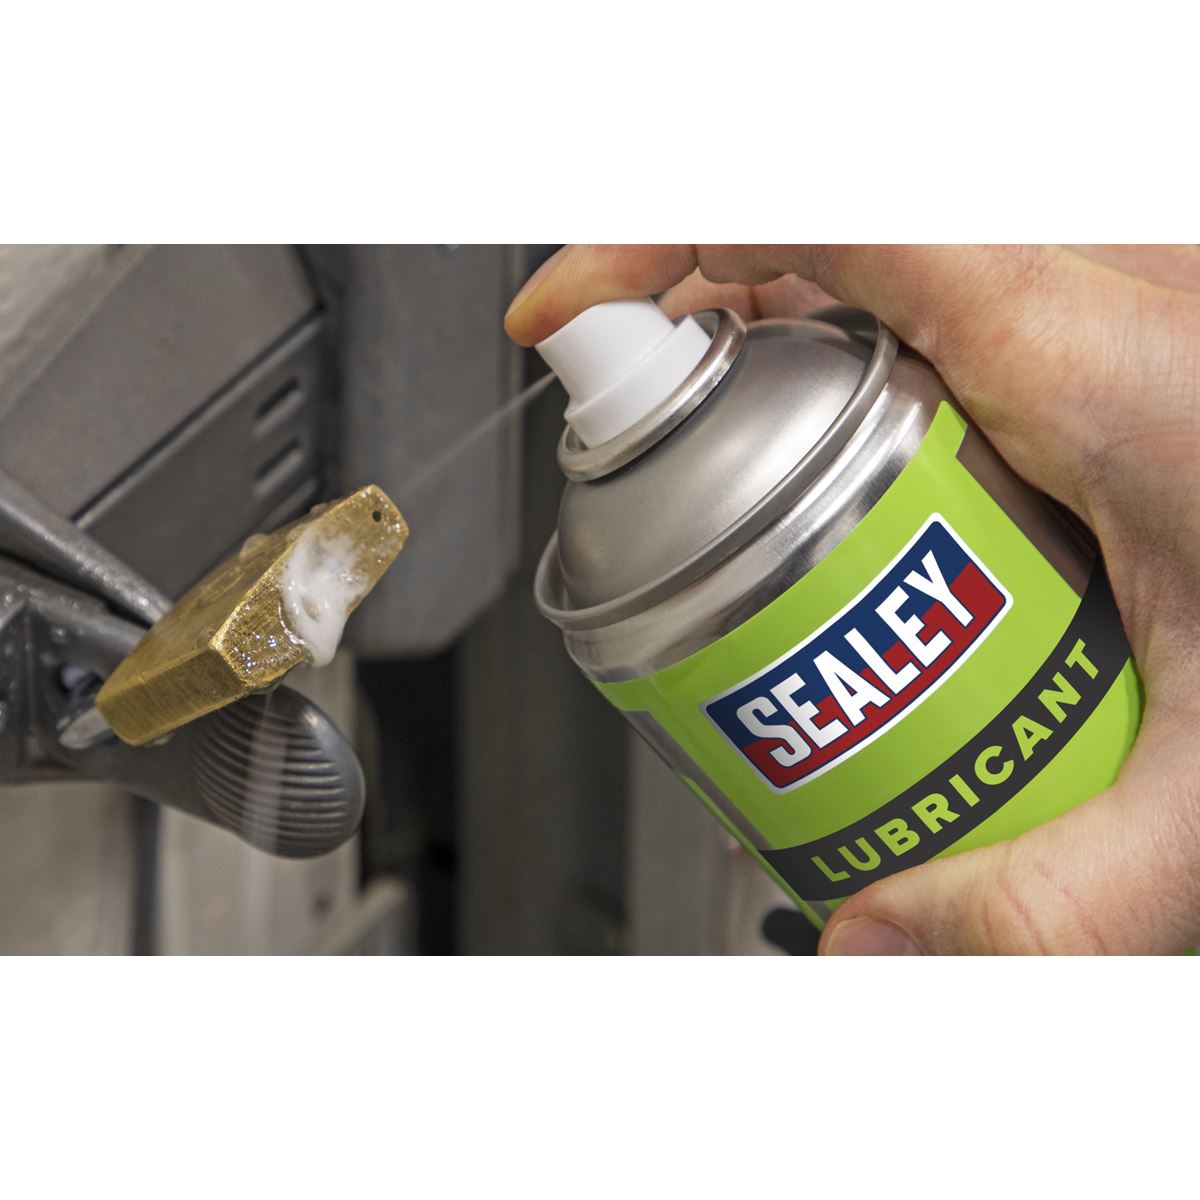 Sealey 500ml Graphited Penetrating Oil Lubricant Spray